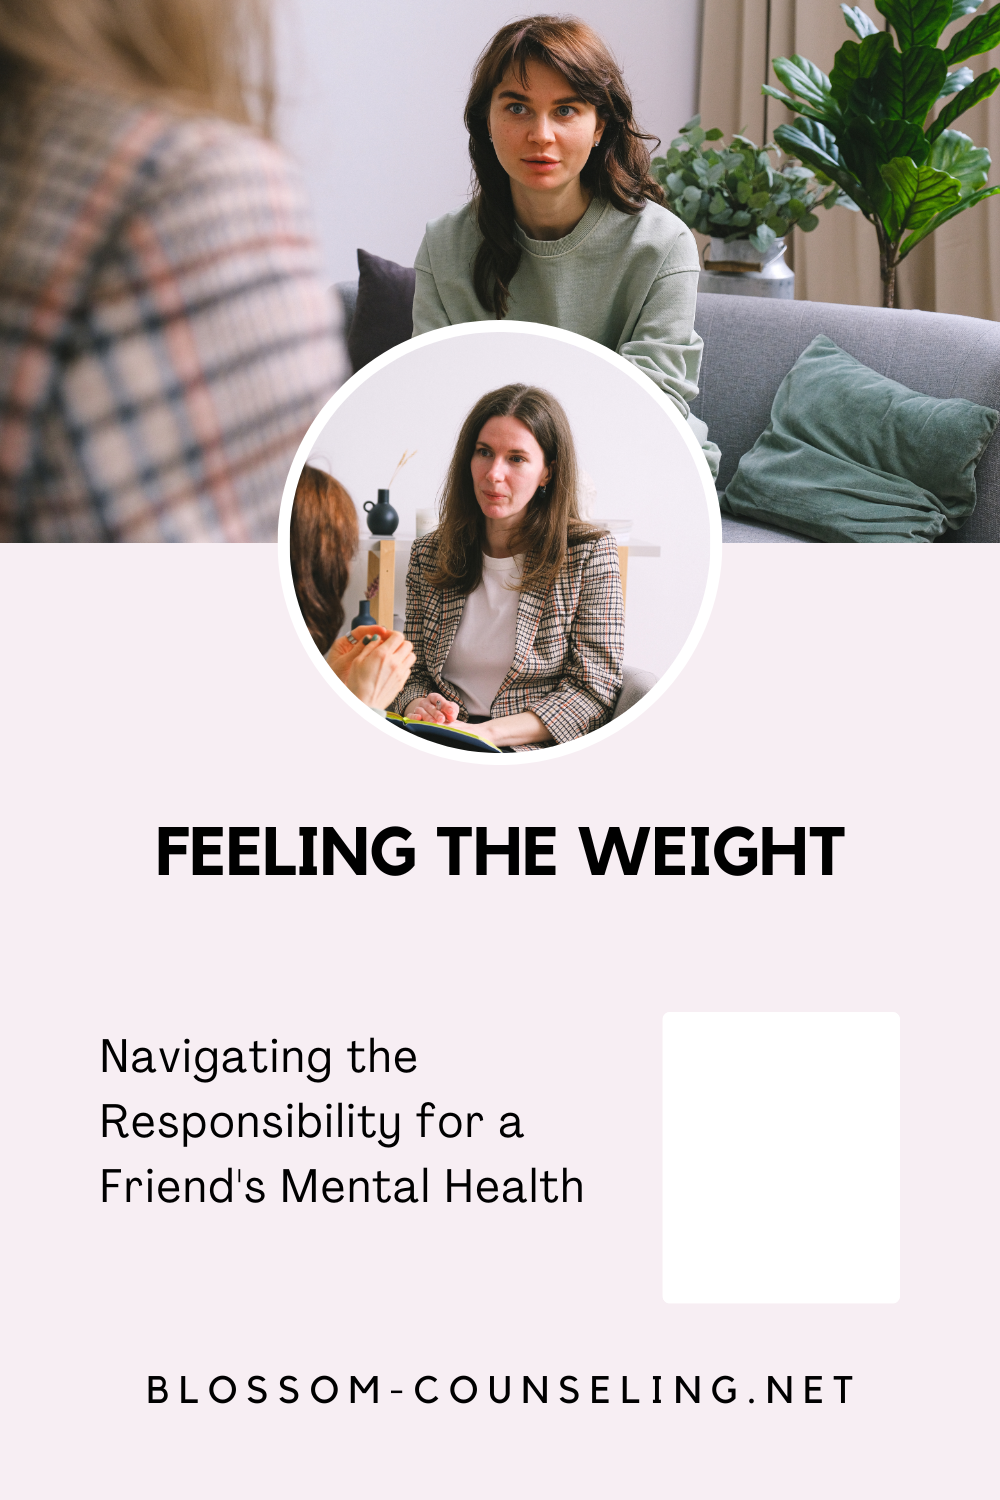 Feeling the Weight: Navigating the Responsibility for a Friend's Mental Health